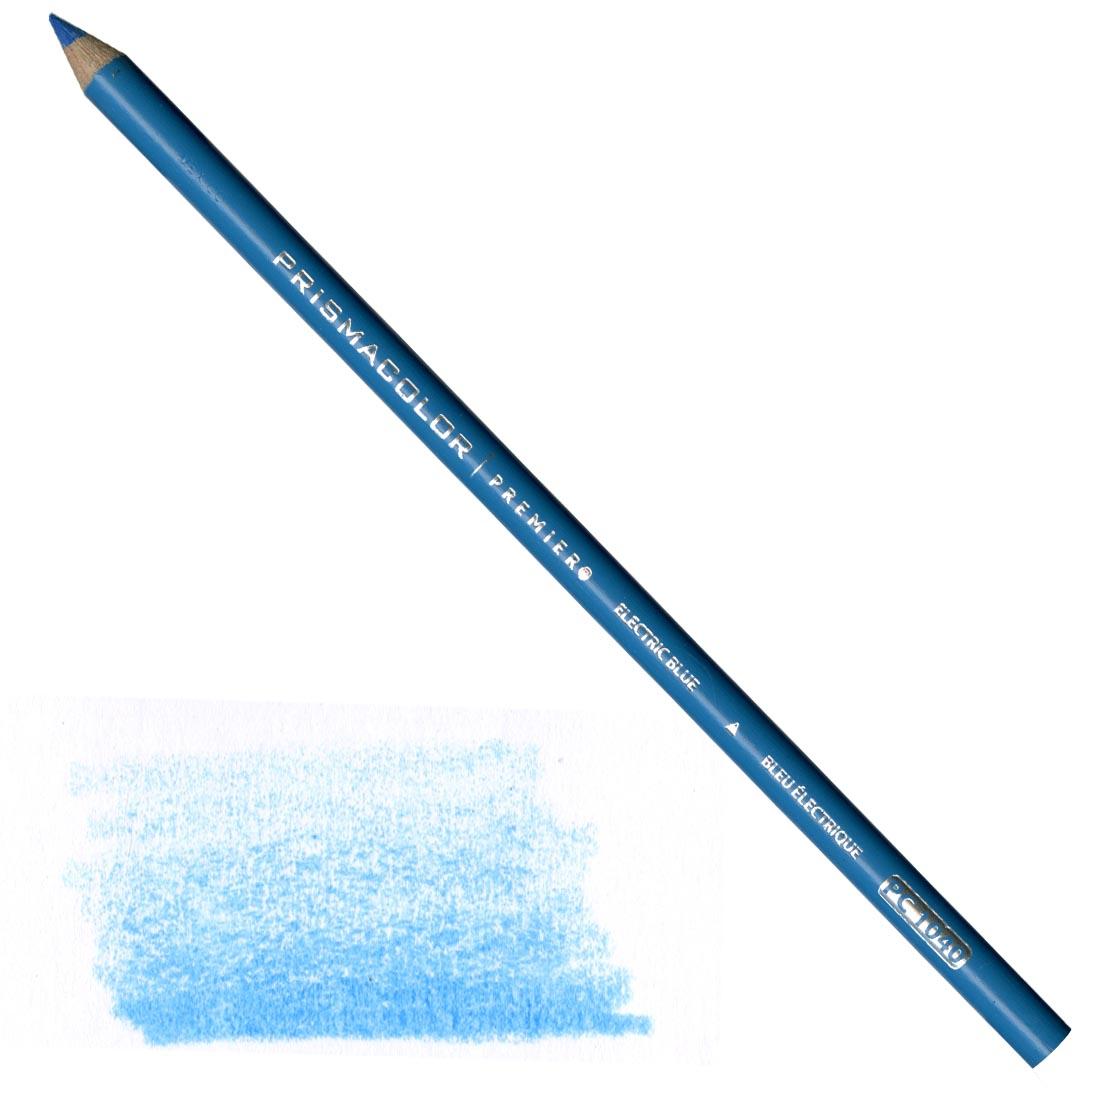 Electric Blue Prismacolor Premier Colored Pencil with a sample colored swatch